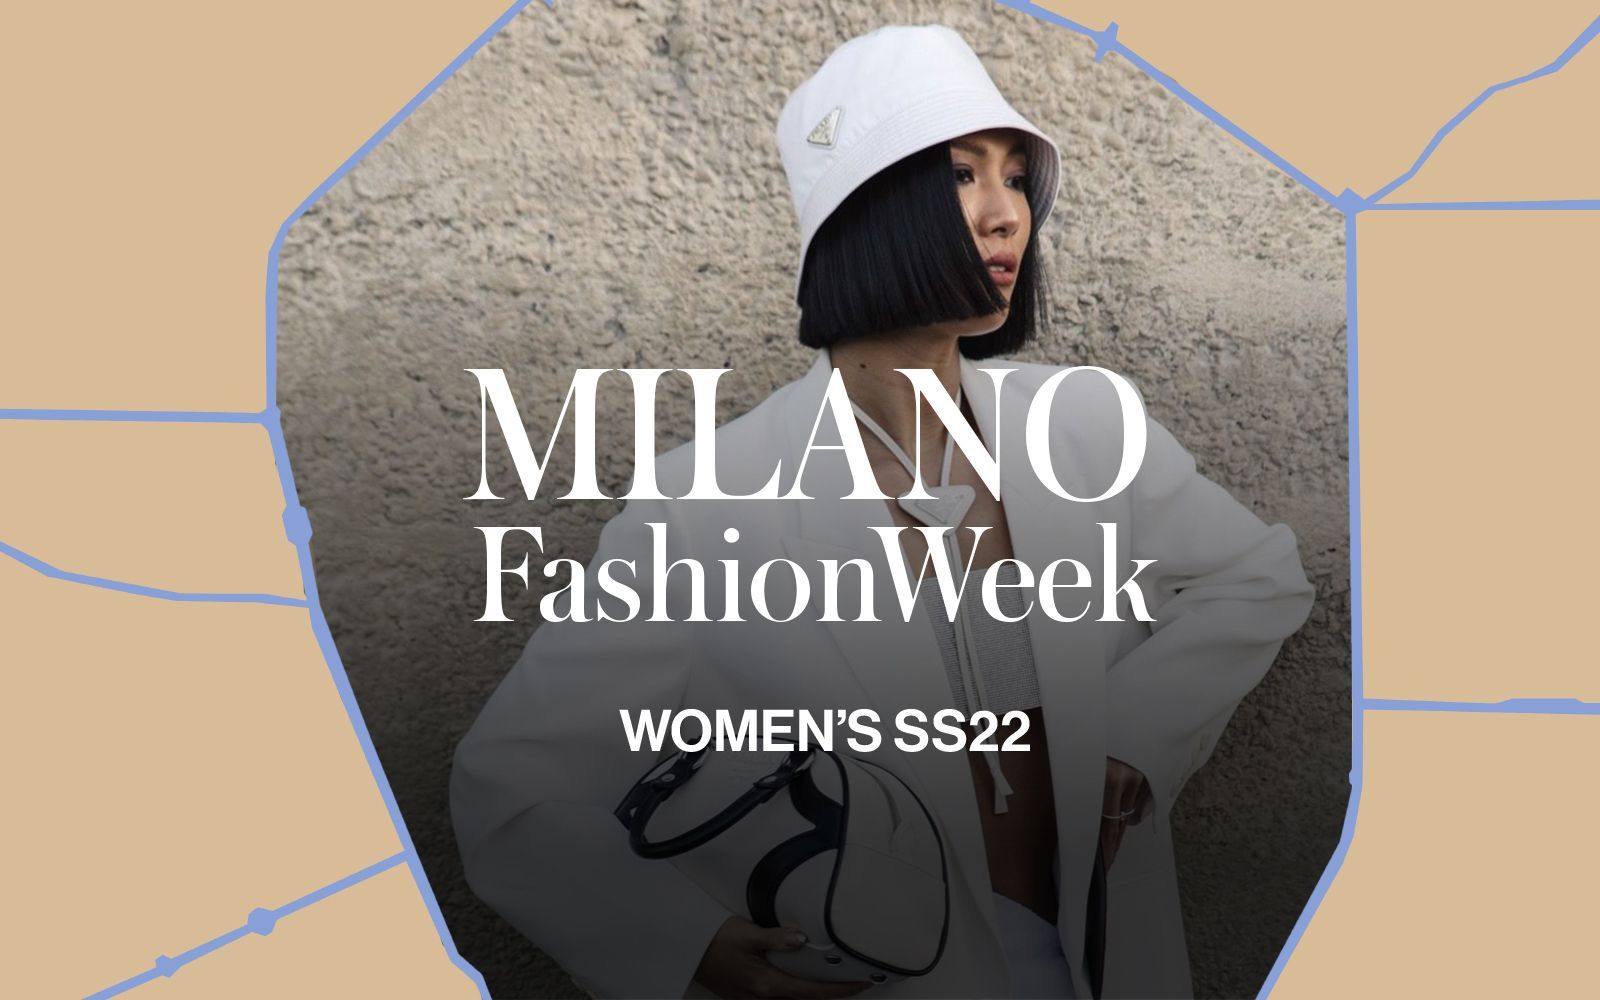 The map of Milan Fashion Week Women's SS22 Fashion returns to the city with shows, events and exhibitions from 21 to 27 September